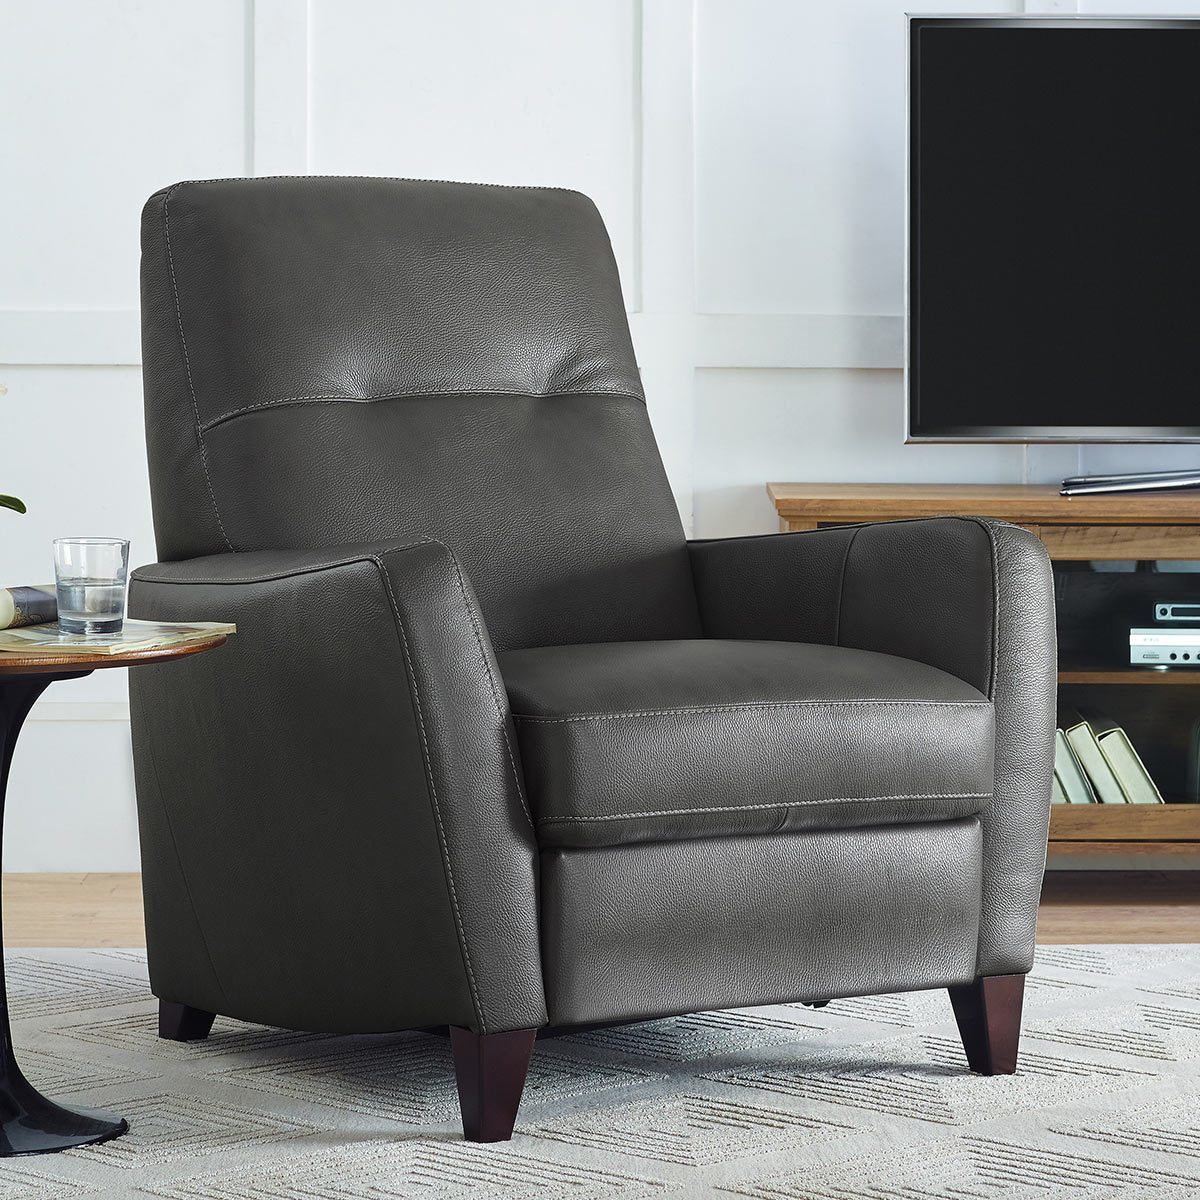 Natuzzi Mills Grey Leather Pushback Recliner Armchair - Signature Retail Stores